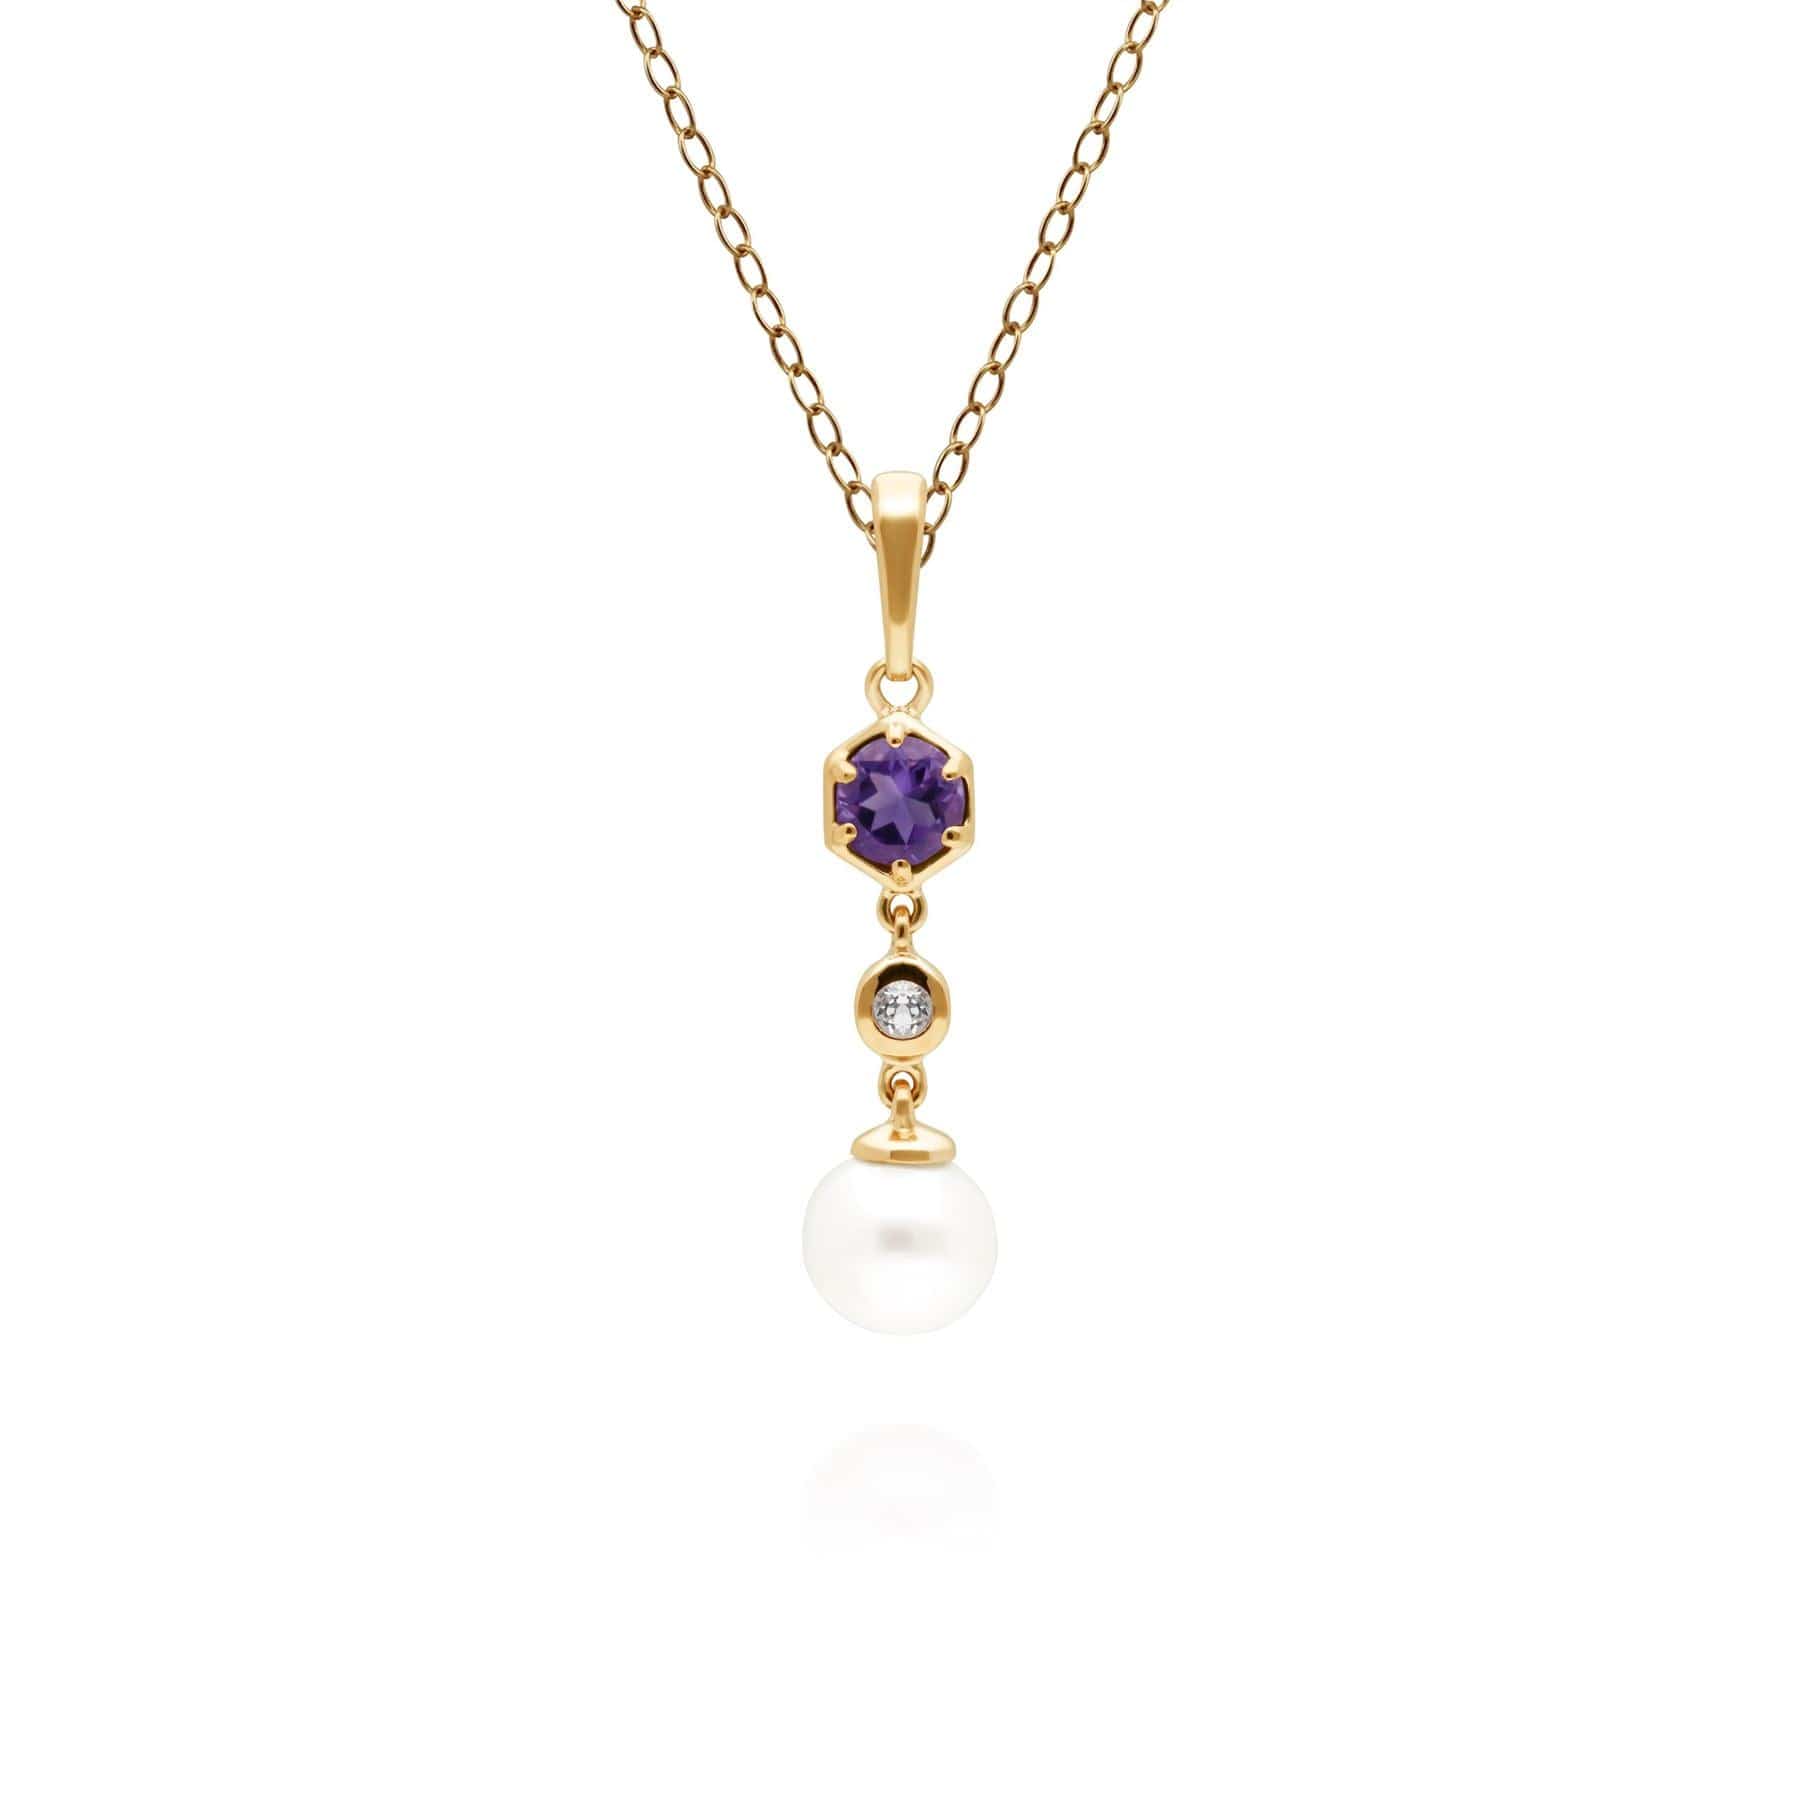 Photos - Pendant / Choker Necklace Modern Pearl, Amethyst & Topaz Drop Pendant in Gold Plated Silver